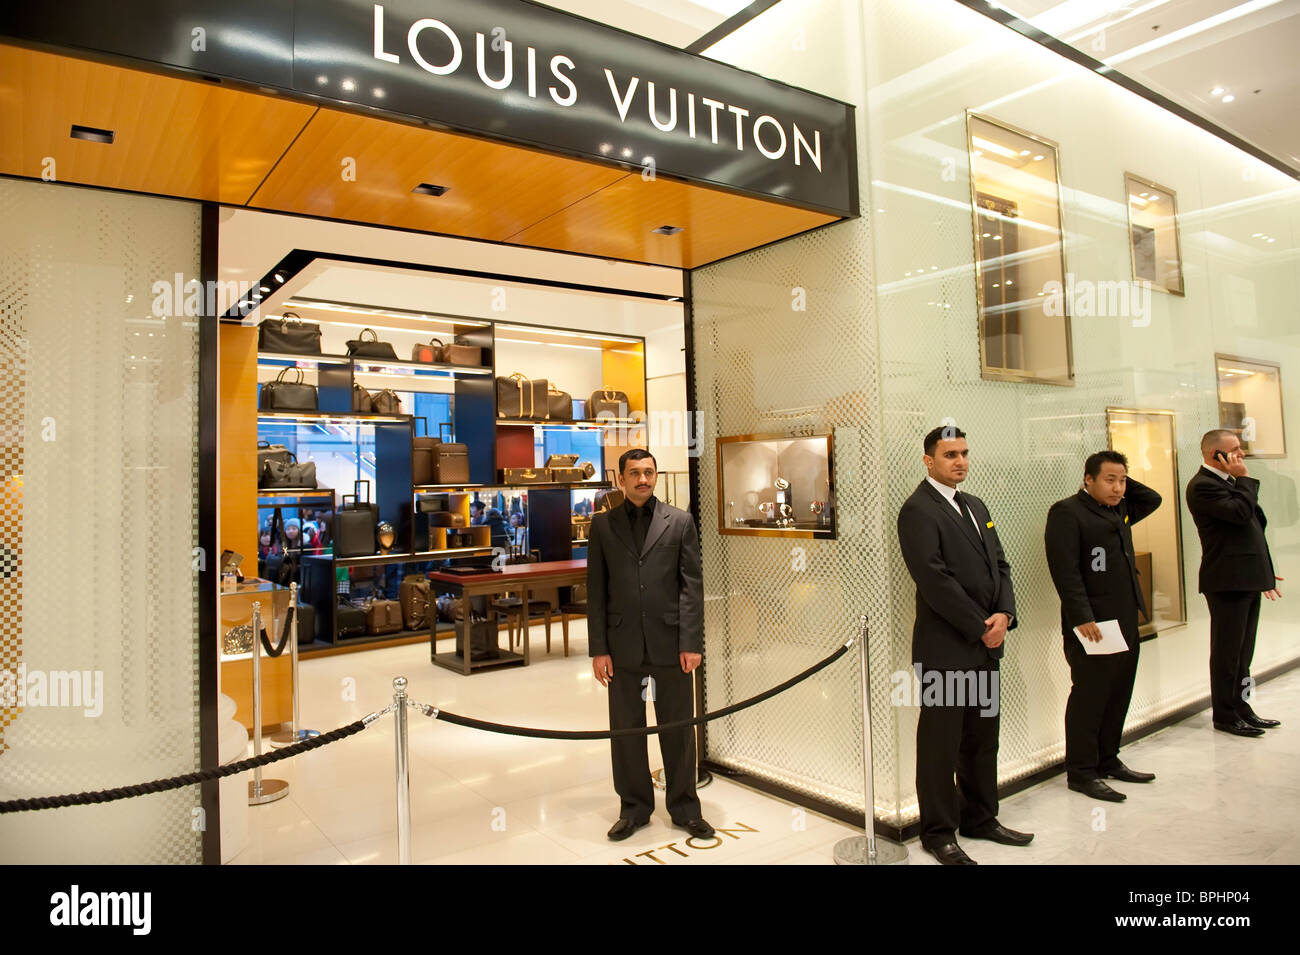 Louis Vuitton Shopper Selfridges | Confederated Tribes of the Umatilla Indian Reservation